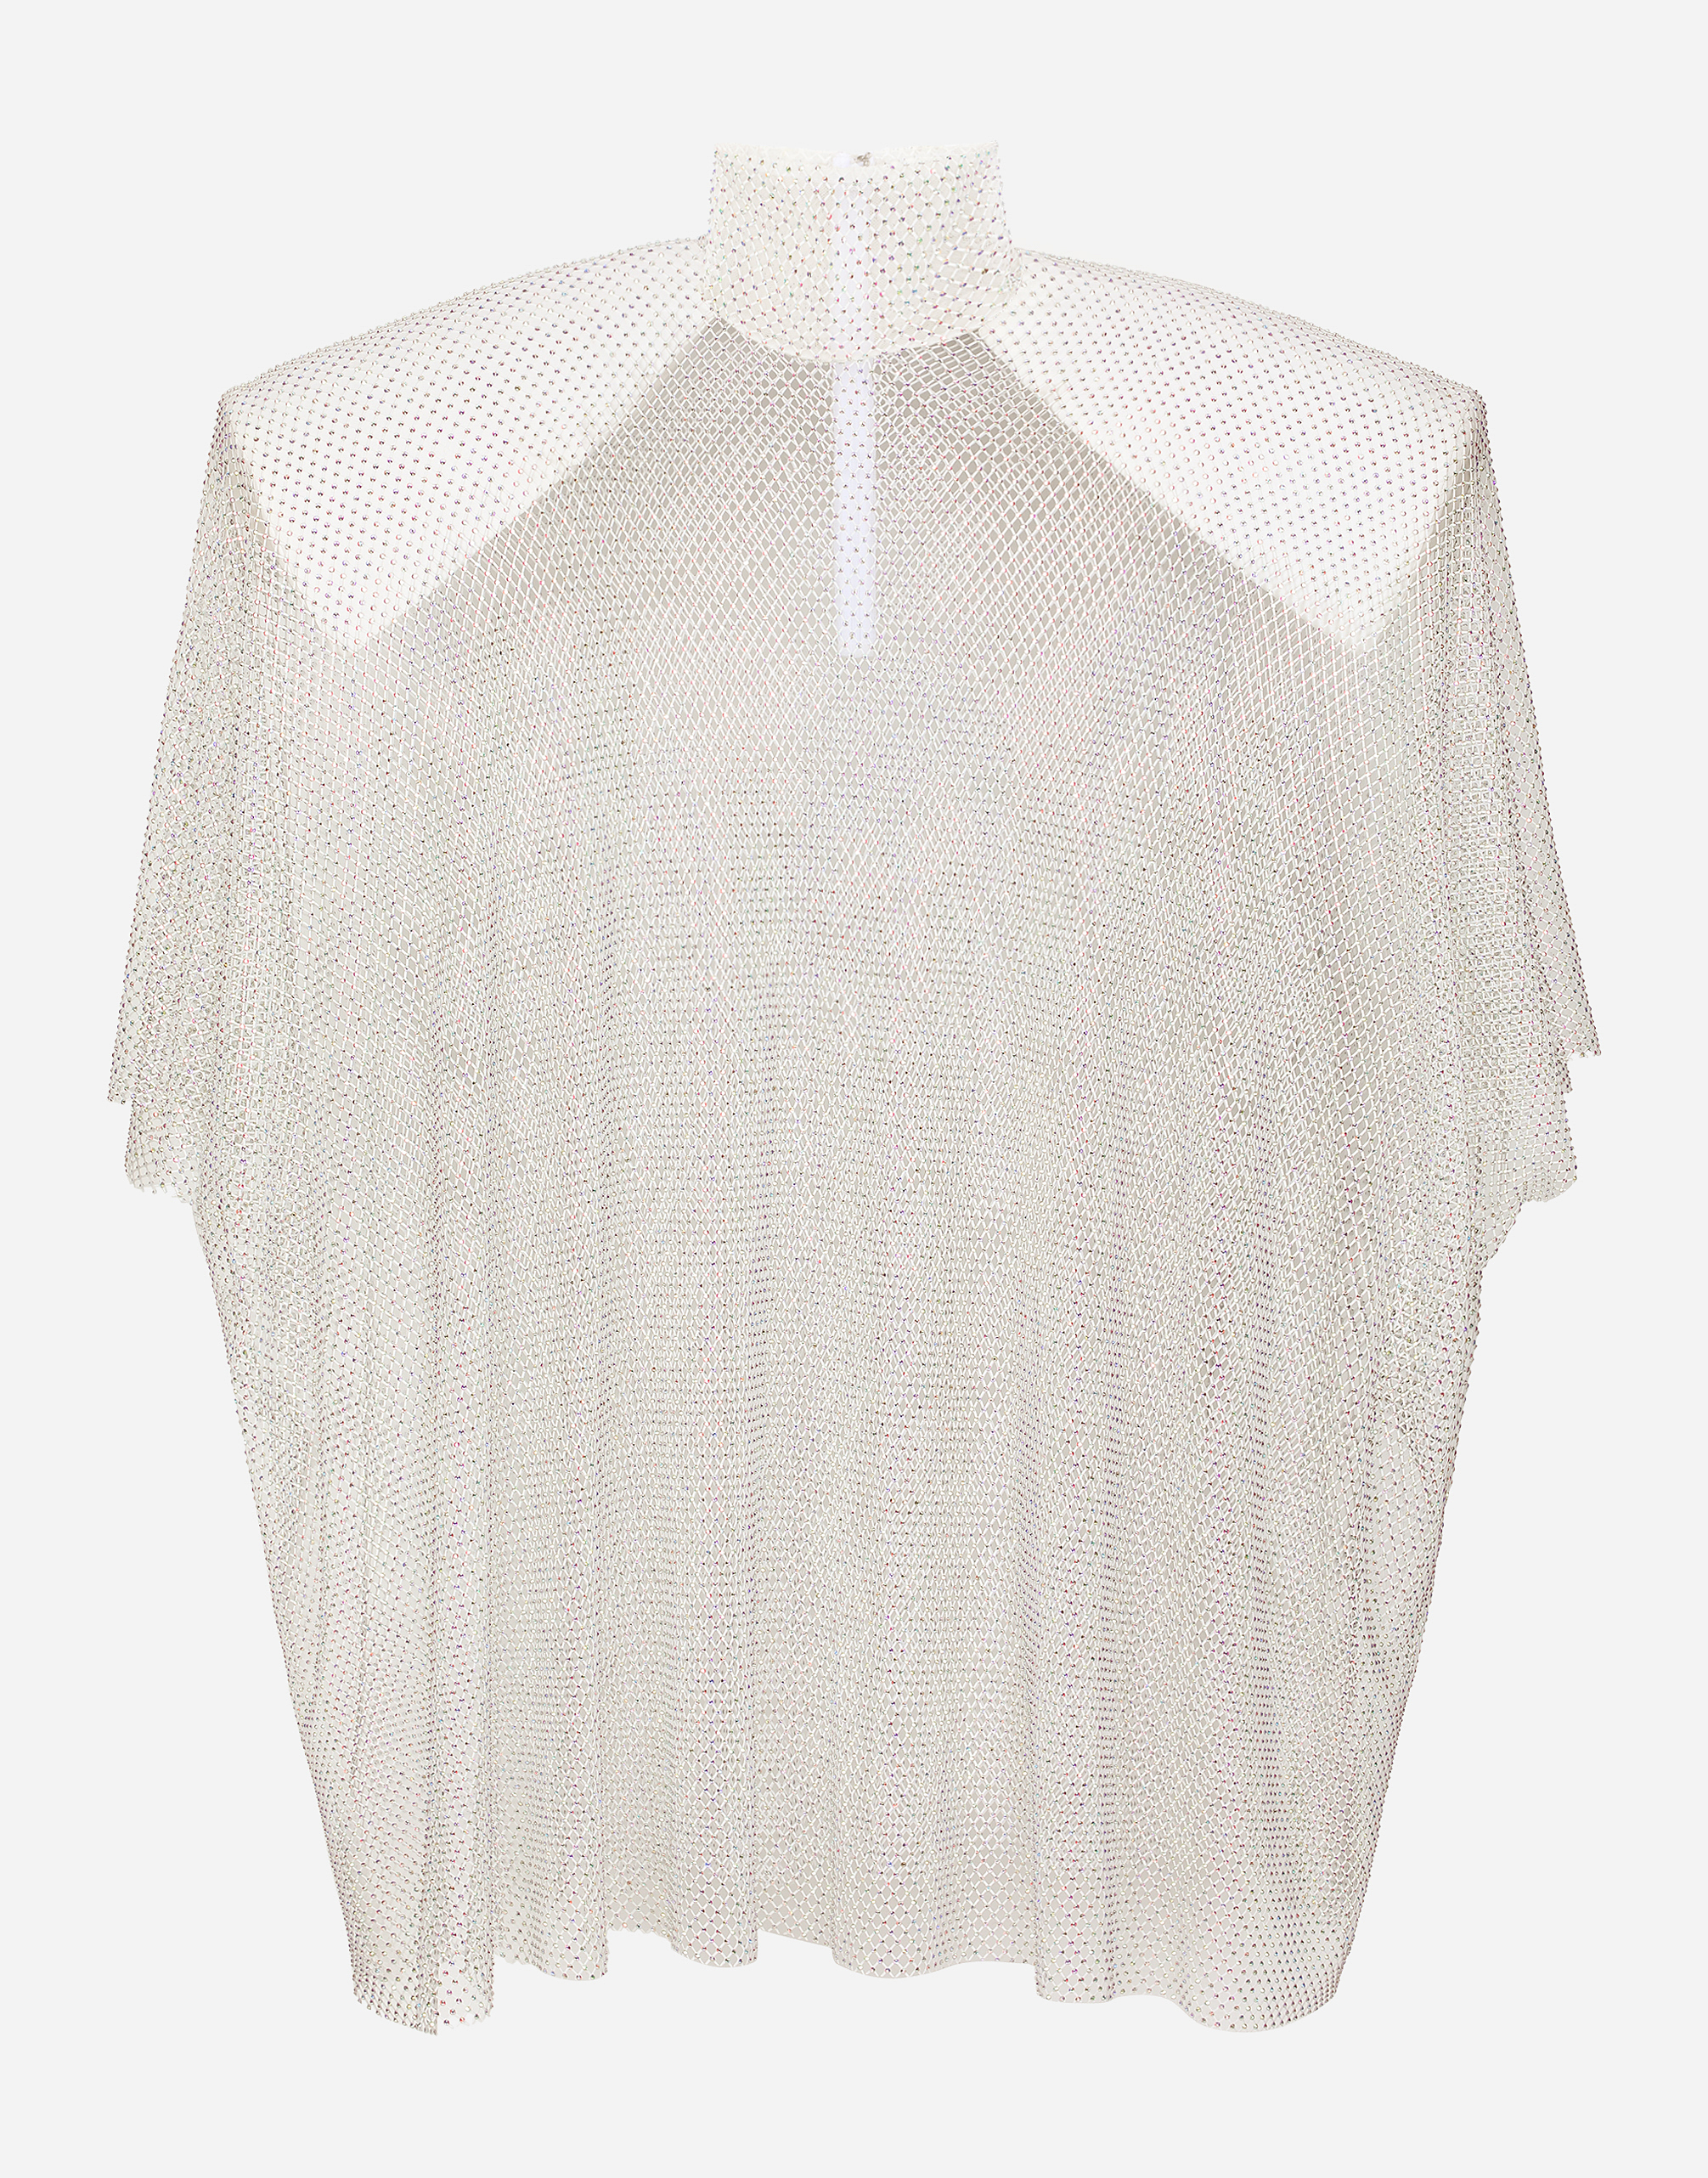 Mesh blouse with rhinestone appliqués in White